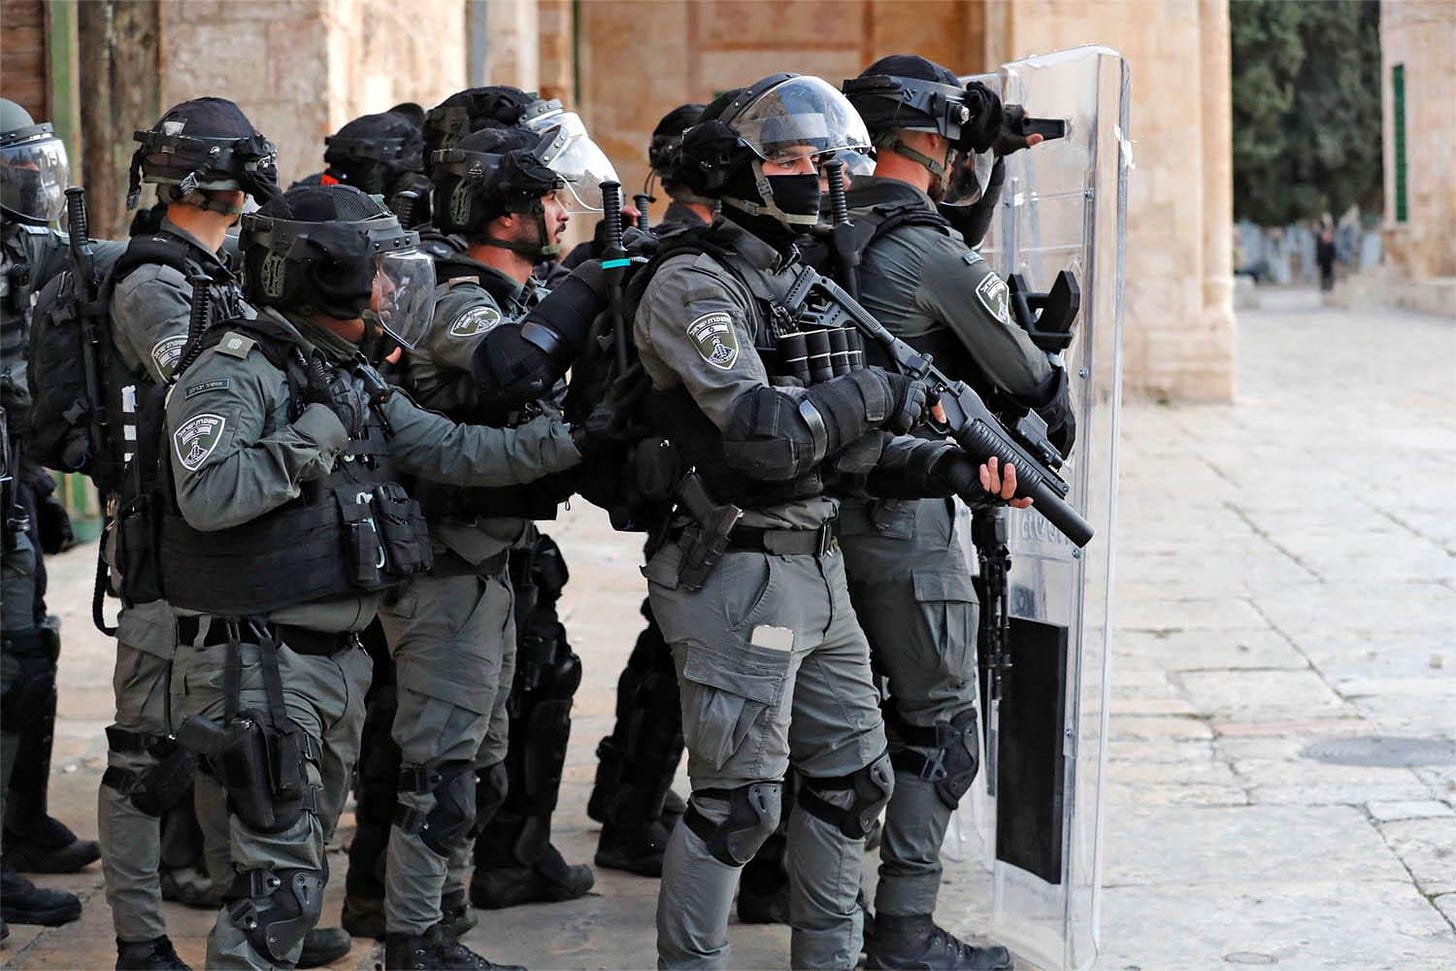 Palestinians clash with Israeli police at Al Aqsa mosque | MEO